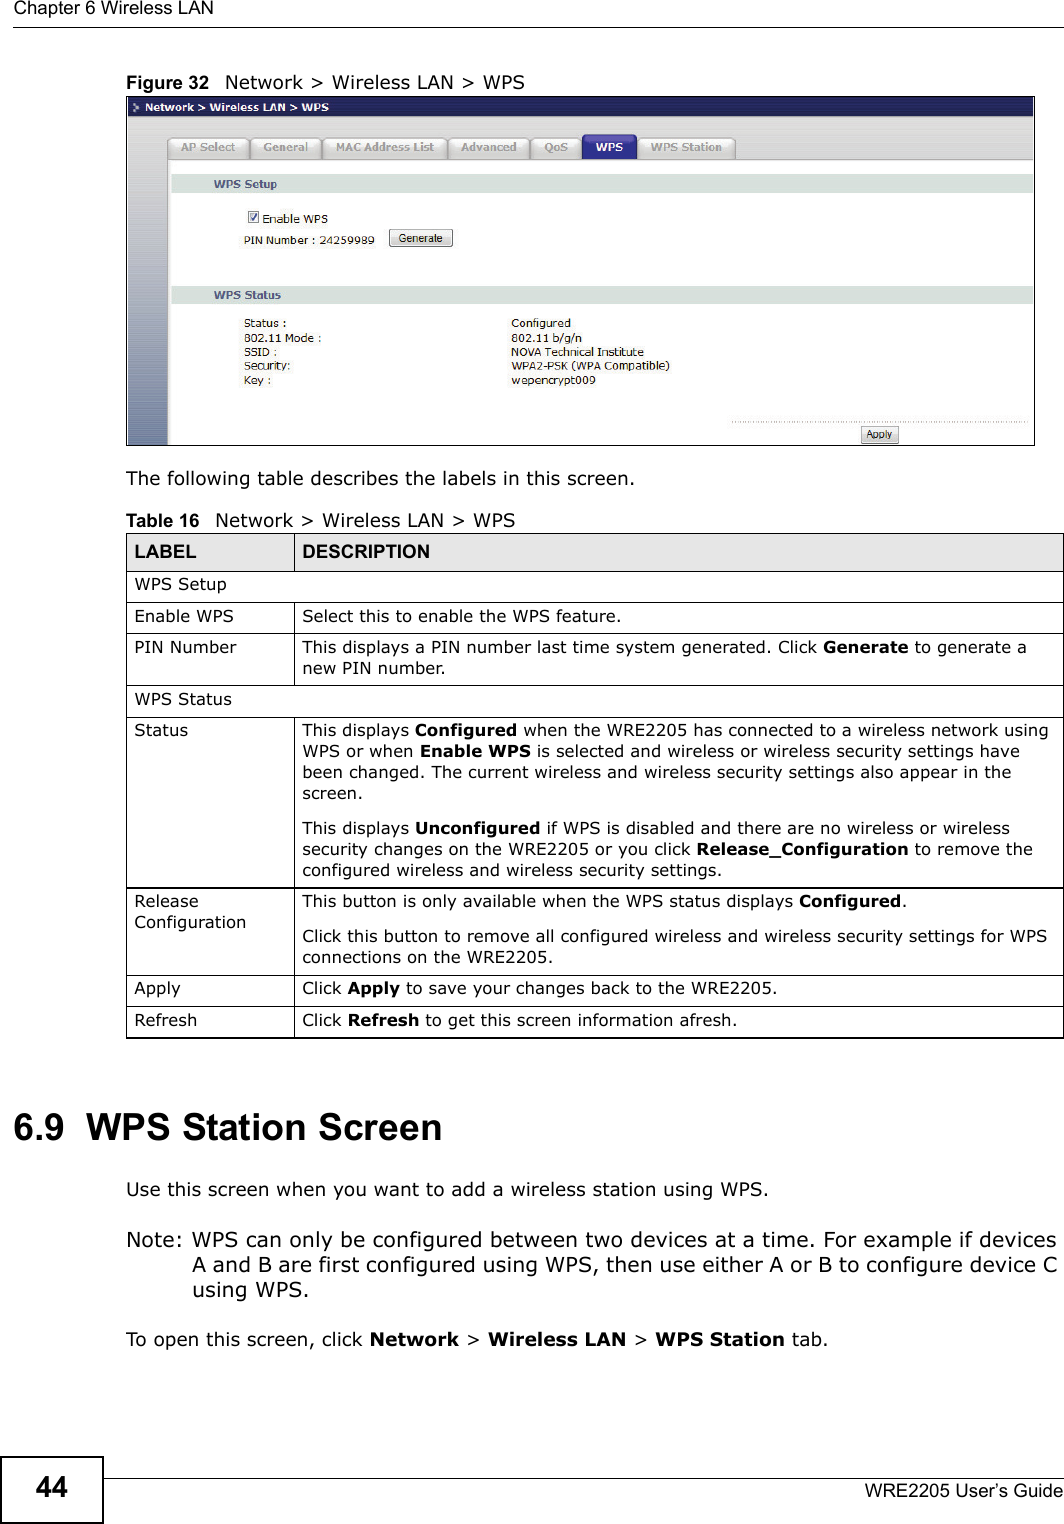 Chapter 6 Wireless LANWRE2205 User’s Guide44Figure 32   Network &gt; Wireless LAN &gt; WPSThe following table describes the labels in this screen.6.9  WPS Station ScreenUse this screen when you want to add a wireless station using WPS. Note: WPS can only be configured between two devices at a time. For example if devices A and B are first configured using WPS, then use either A or B to configure device C using WPS. To open this screen, click Network &gt; Wireless LAN &gt; WPS Station tab.Table 16   Network &gt; Wireless LAN &gt; WPSLABEL DESCRIPTIONWPS SetupEnable WPS Select this to enable the WPS feature.PIN Number This displays a PIN number last time system generated. Click Generate to generate a new PIN number.WPS StatusStatus This displays Configured when the WRE2205 has connected to a wireless network using WPS or when Enable WPS is selected and wireless or wireless security settings have been changed. The current wireless and wireless security settings also appear in the screen.This displays Unconfigured if WPS is disabled and there are no wireless or wireless security changes on the WRE2205 or you click Release_Configuration to remove the configured wireless and wireless security settings.Release ConfigurationThis button is only available when the WPS status displays Configured.Click this button to remove all configured wireless and wireless security settings for WPS connections on the WRE2205.Apply Click Apply to save your changes back to the WRE2205.Refresh Click Refresh to get this screen information afresh.